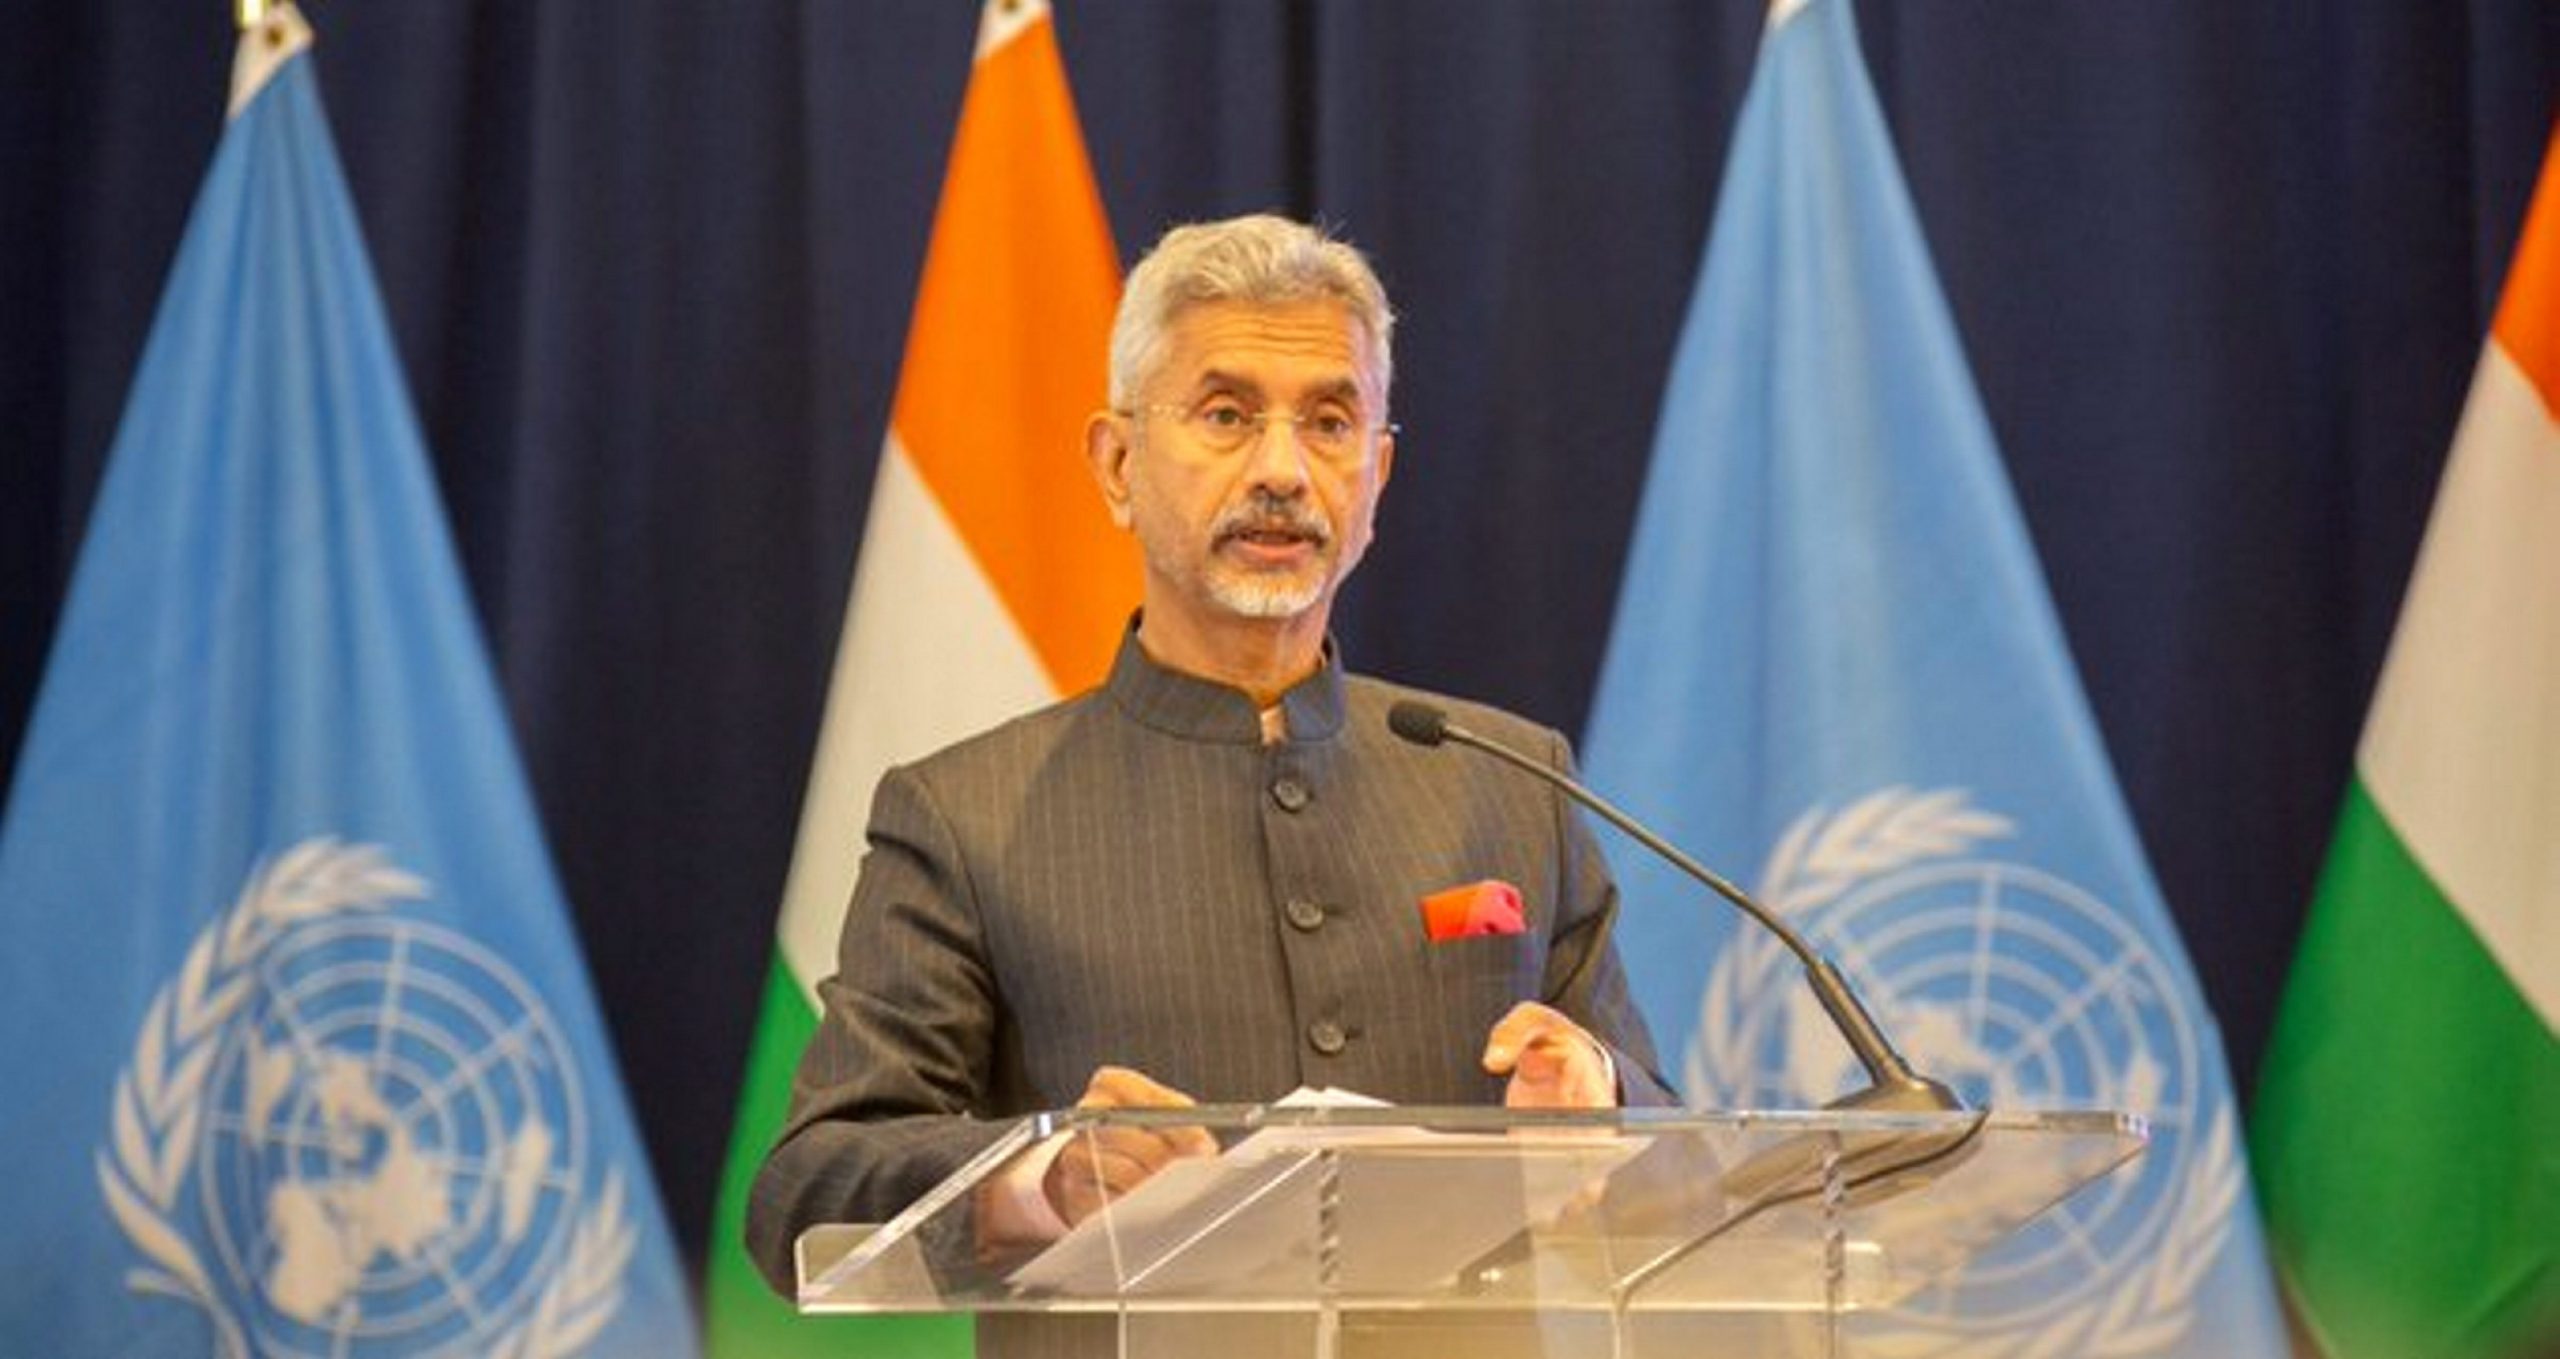 India really matters more in this polarised world: External Affairs Minister S Jaishankar at UNGA